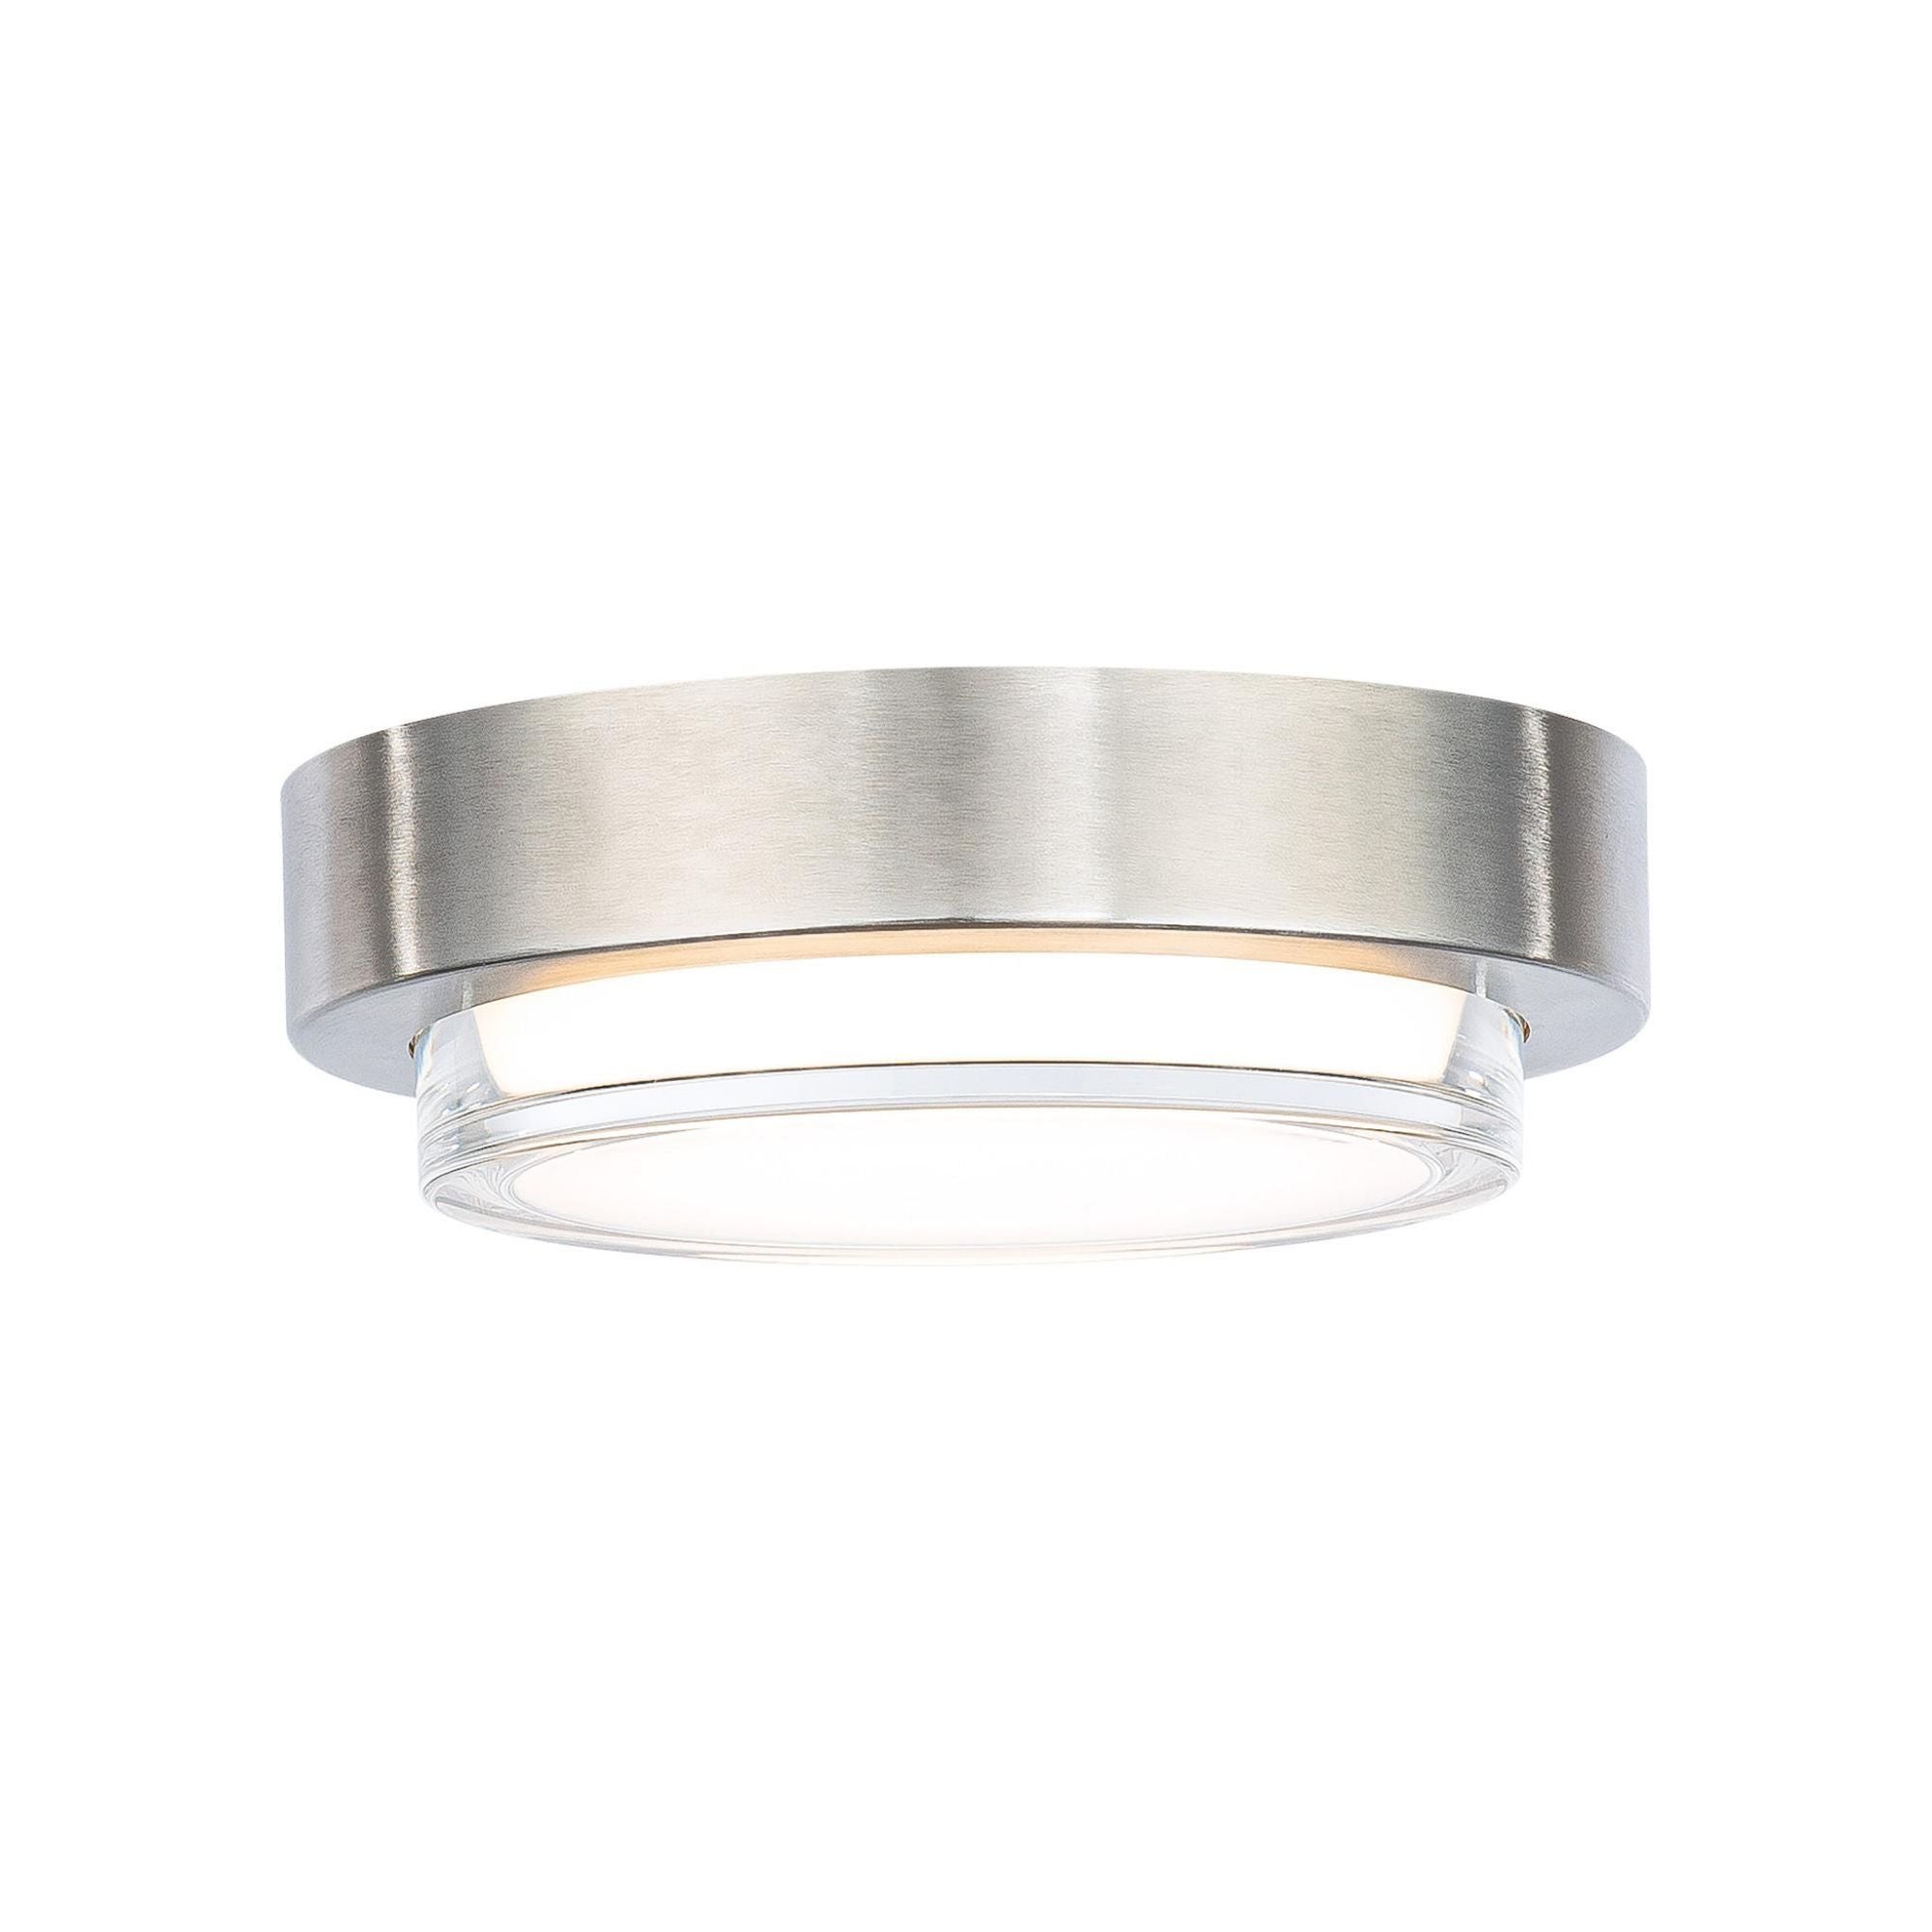 Kind 8in LED Round Indoor or Outdoor Flush Mount 3-CCT 2700K-3000K-3500K Set to 3000K in Stainless Steel